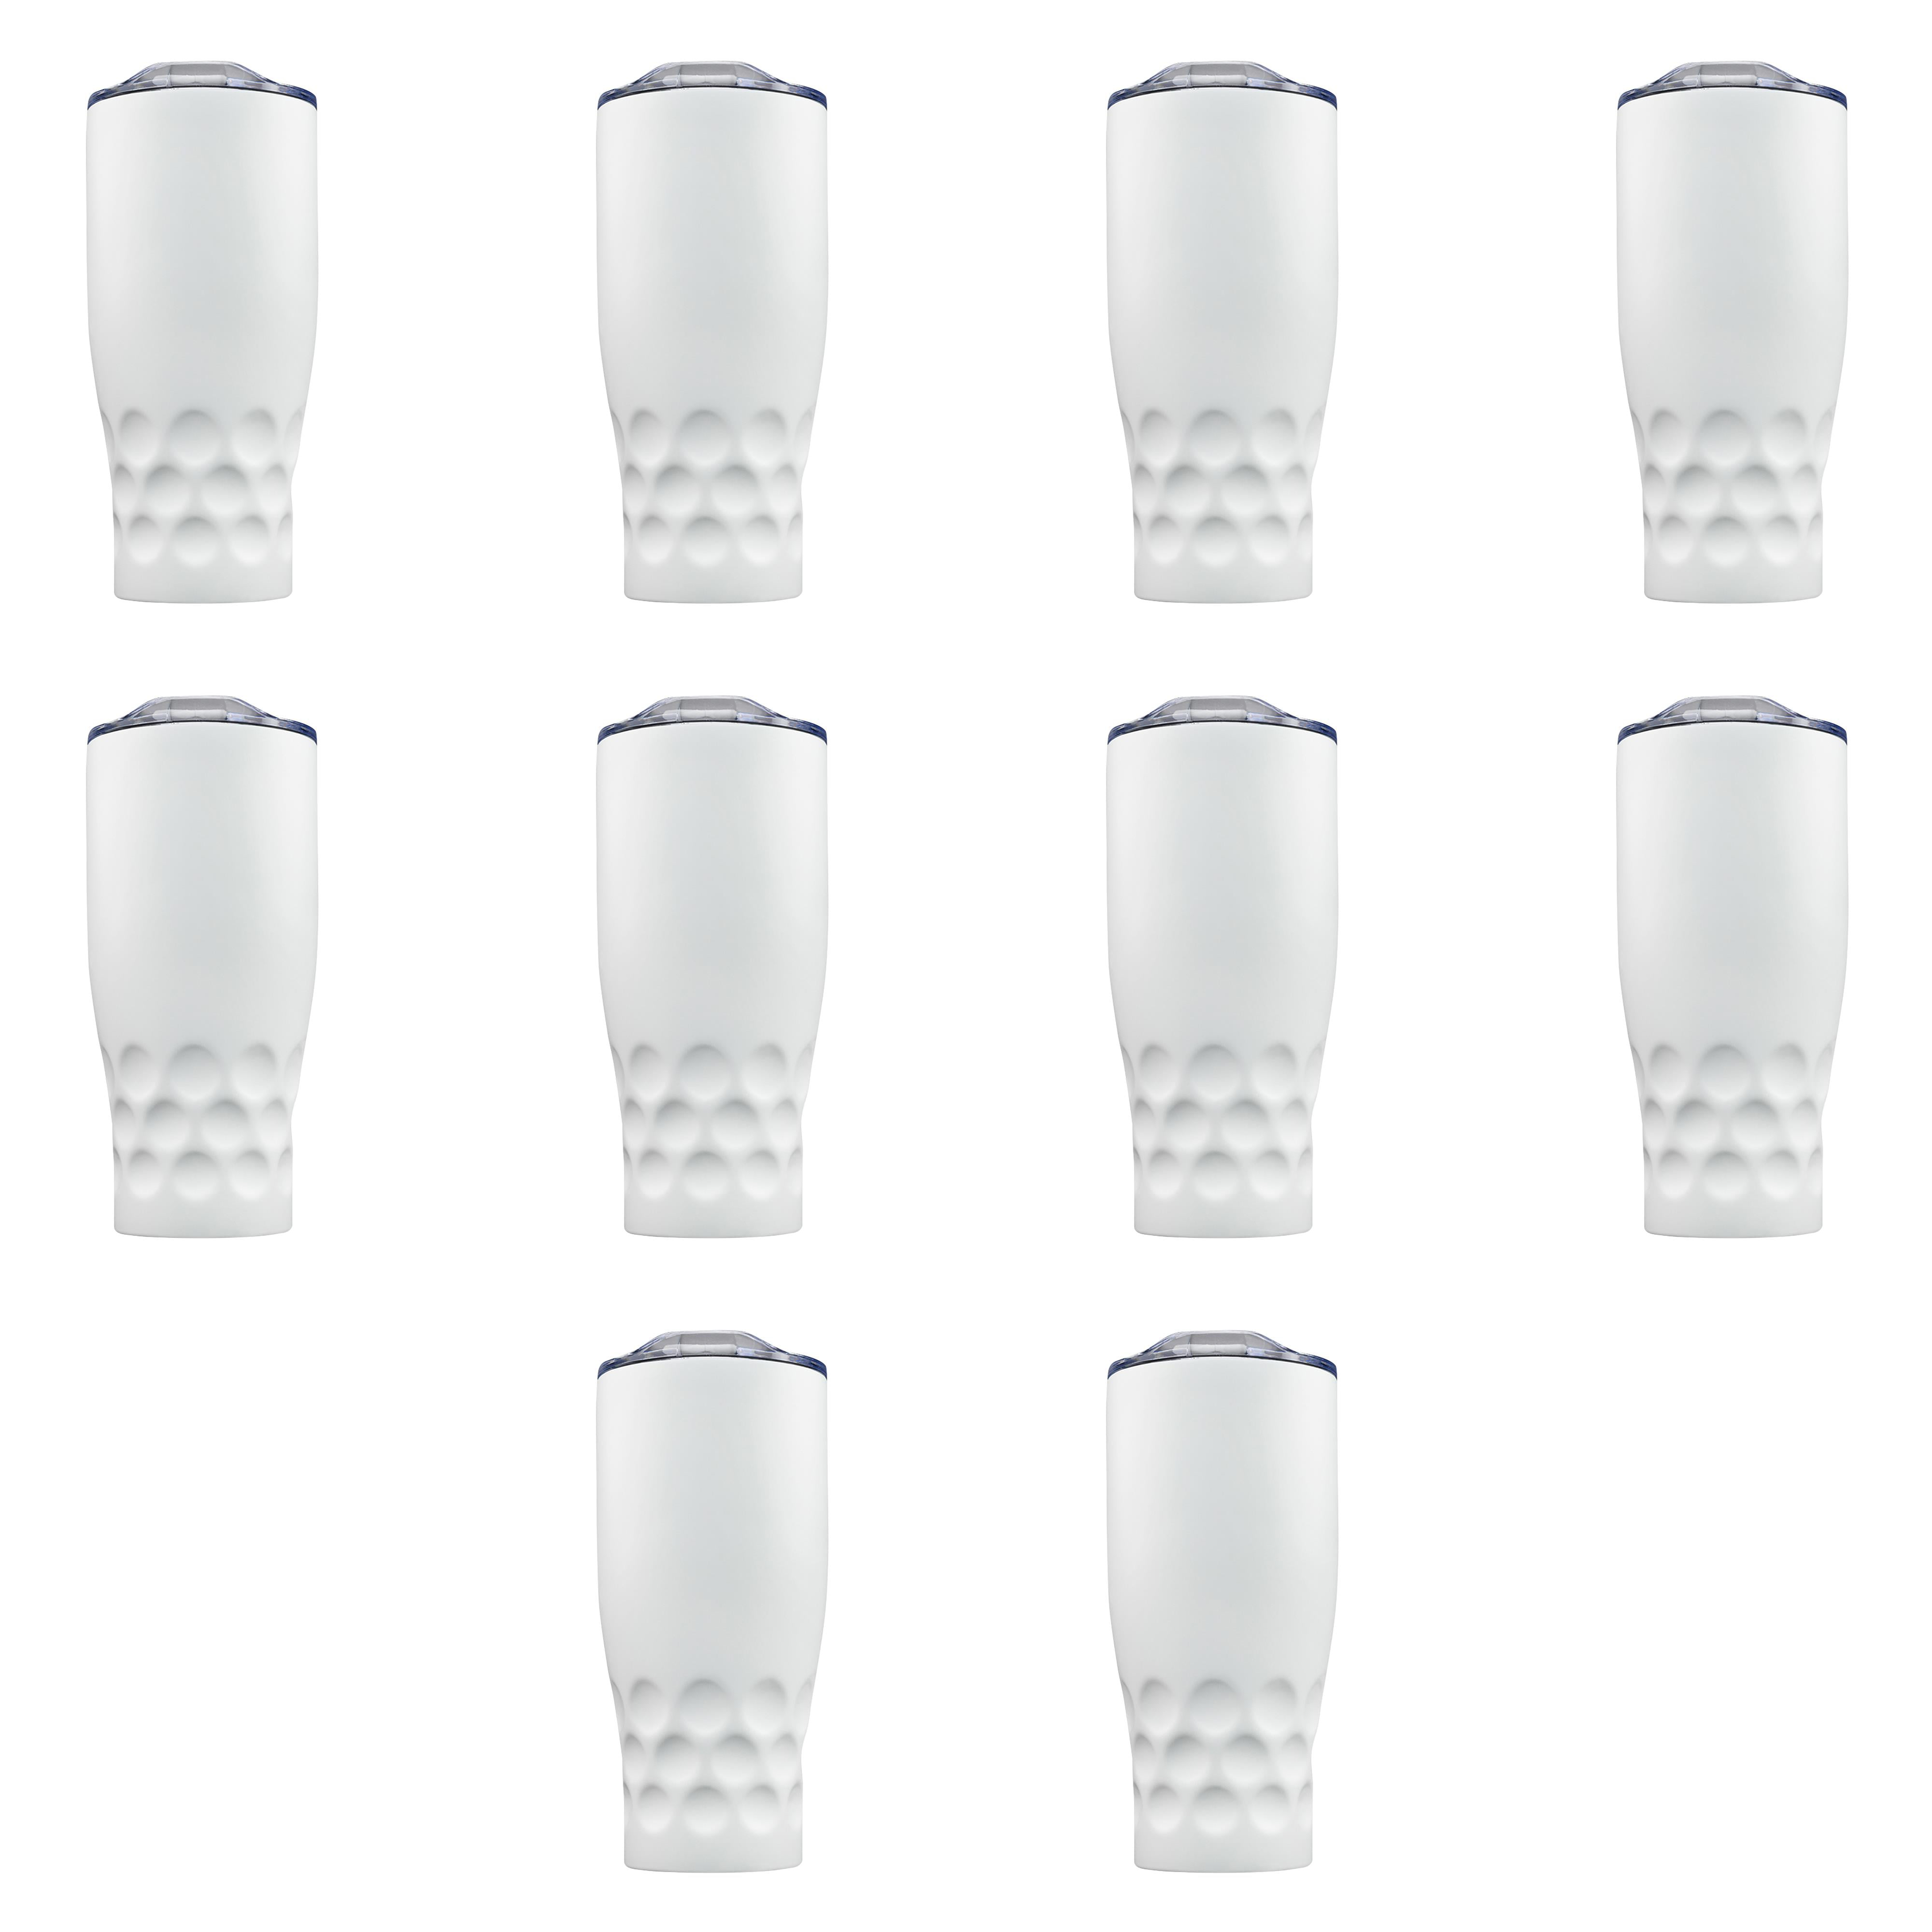 Stainless Steel Tumblers by Molokini 27 oz. Set of 10, Bulk Pack